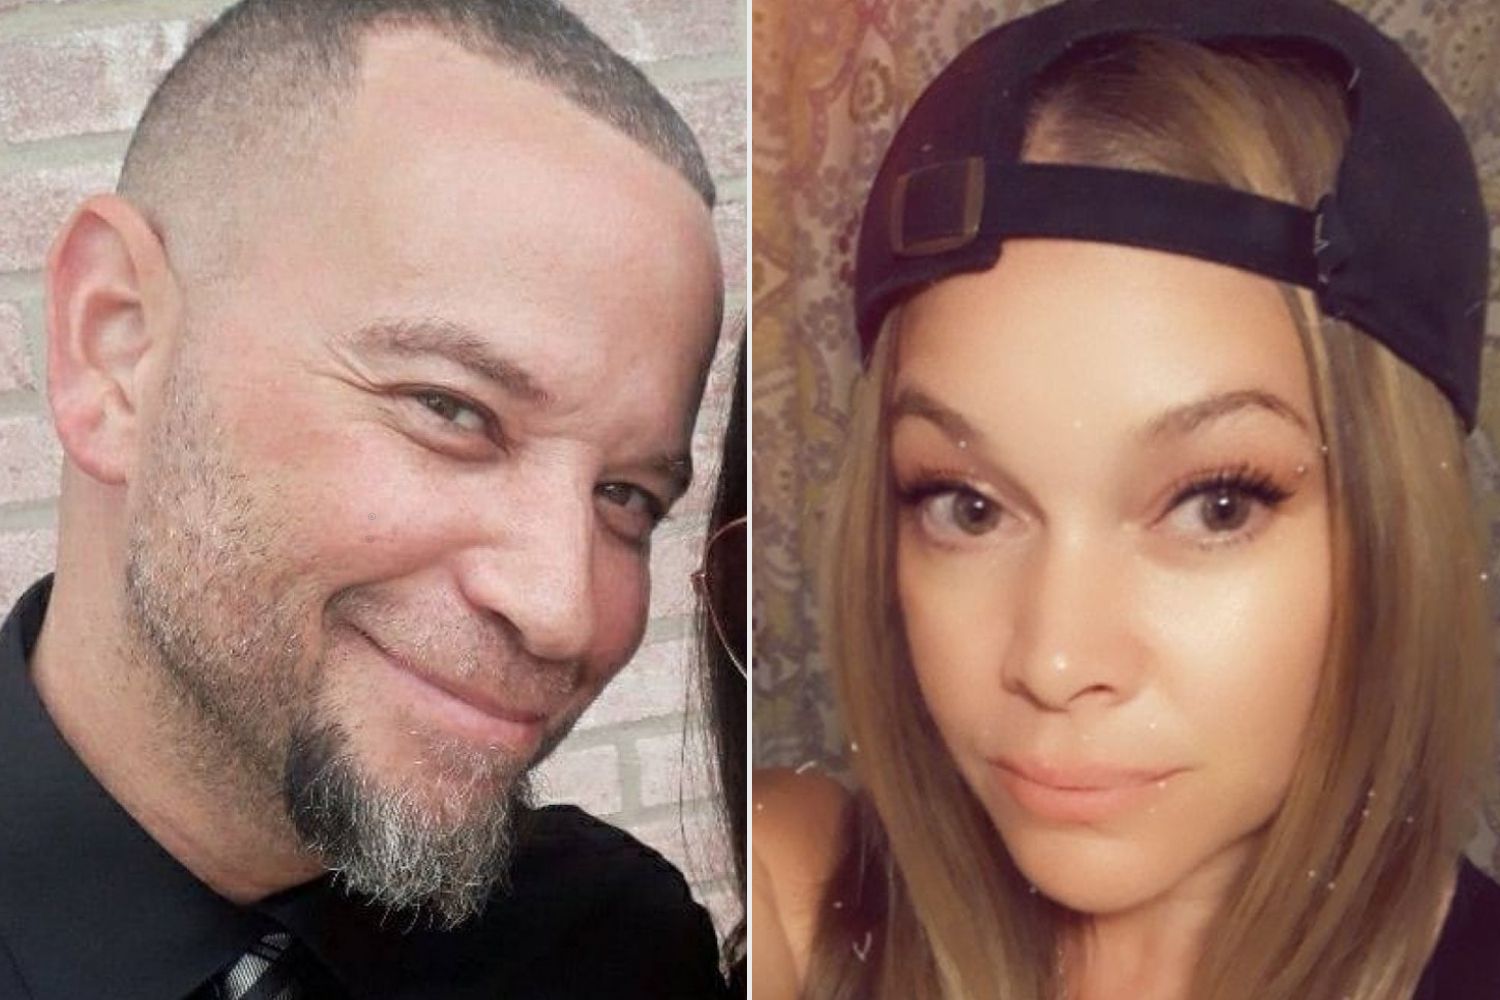 'Murder on My Brain': Man Sent Chilling Texts Before His Wife Was Found Dead With Bruises, Sexual Assault